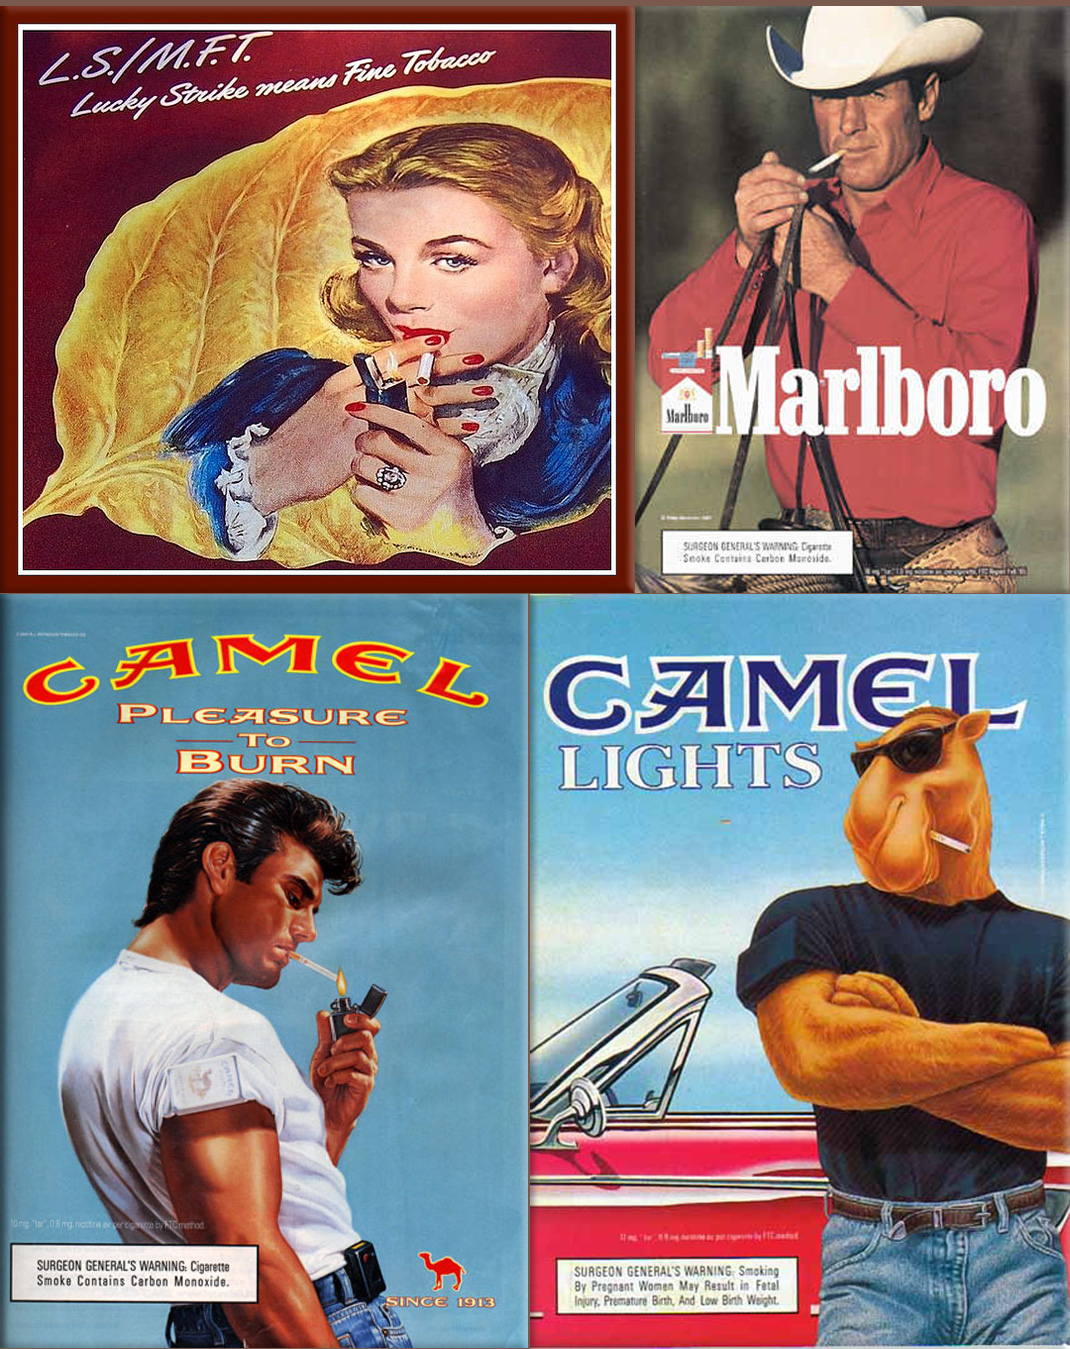 In 1971 cigarette advertisements are banned on American television (1950's Lucky Strike cigarette ad, courtesy of Cornelia Cotton Gallery; The Marlboro Man is assuredly the most successful and most controversial manly brand icon on the list. Created in 1954 by advertiser Leo Burnett, the Marlboro Man was a lone, rugged cowboy who always had a Marlboro cigarette coolly dangling from his lips; In the 1950s and 1960s, cigarettes as Christmas gifts, Ronald Reagan touting Chesterfield cigarettes; Camel cigarettes, picture of the typical 'cool guy' from around the fifties; Camel 1993 Cigarette Ad - Joe Camel Lights Hanging by the Convertible)